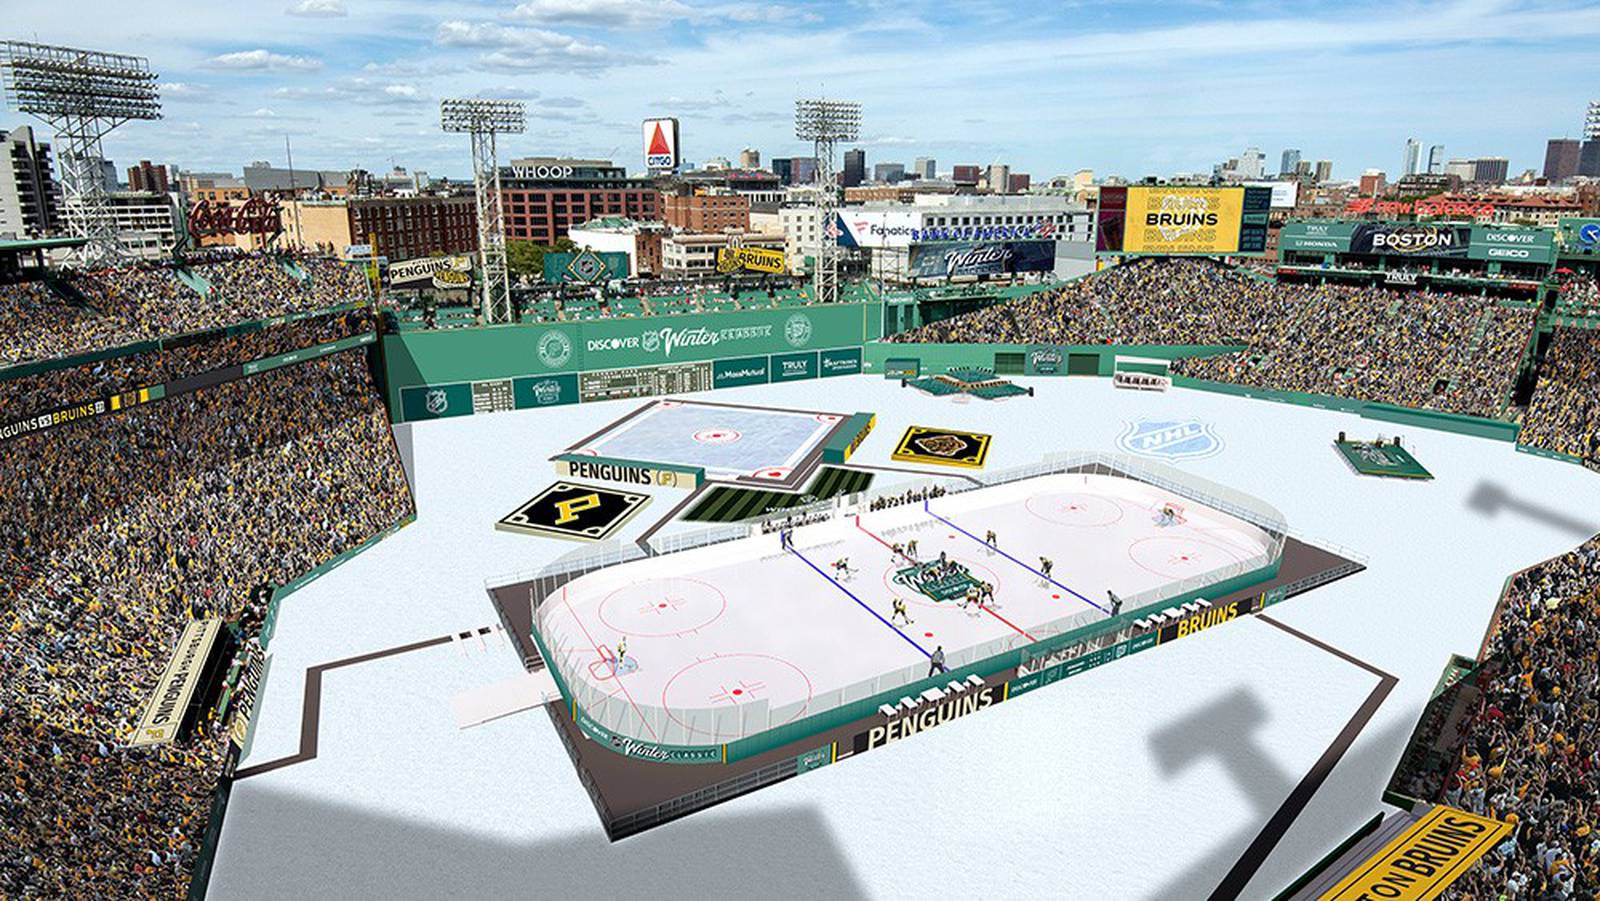 NHL unveils rendering of planned transformation of Fenway Park for 2023